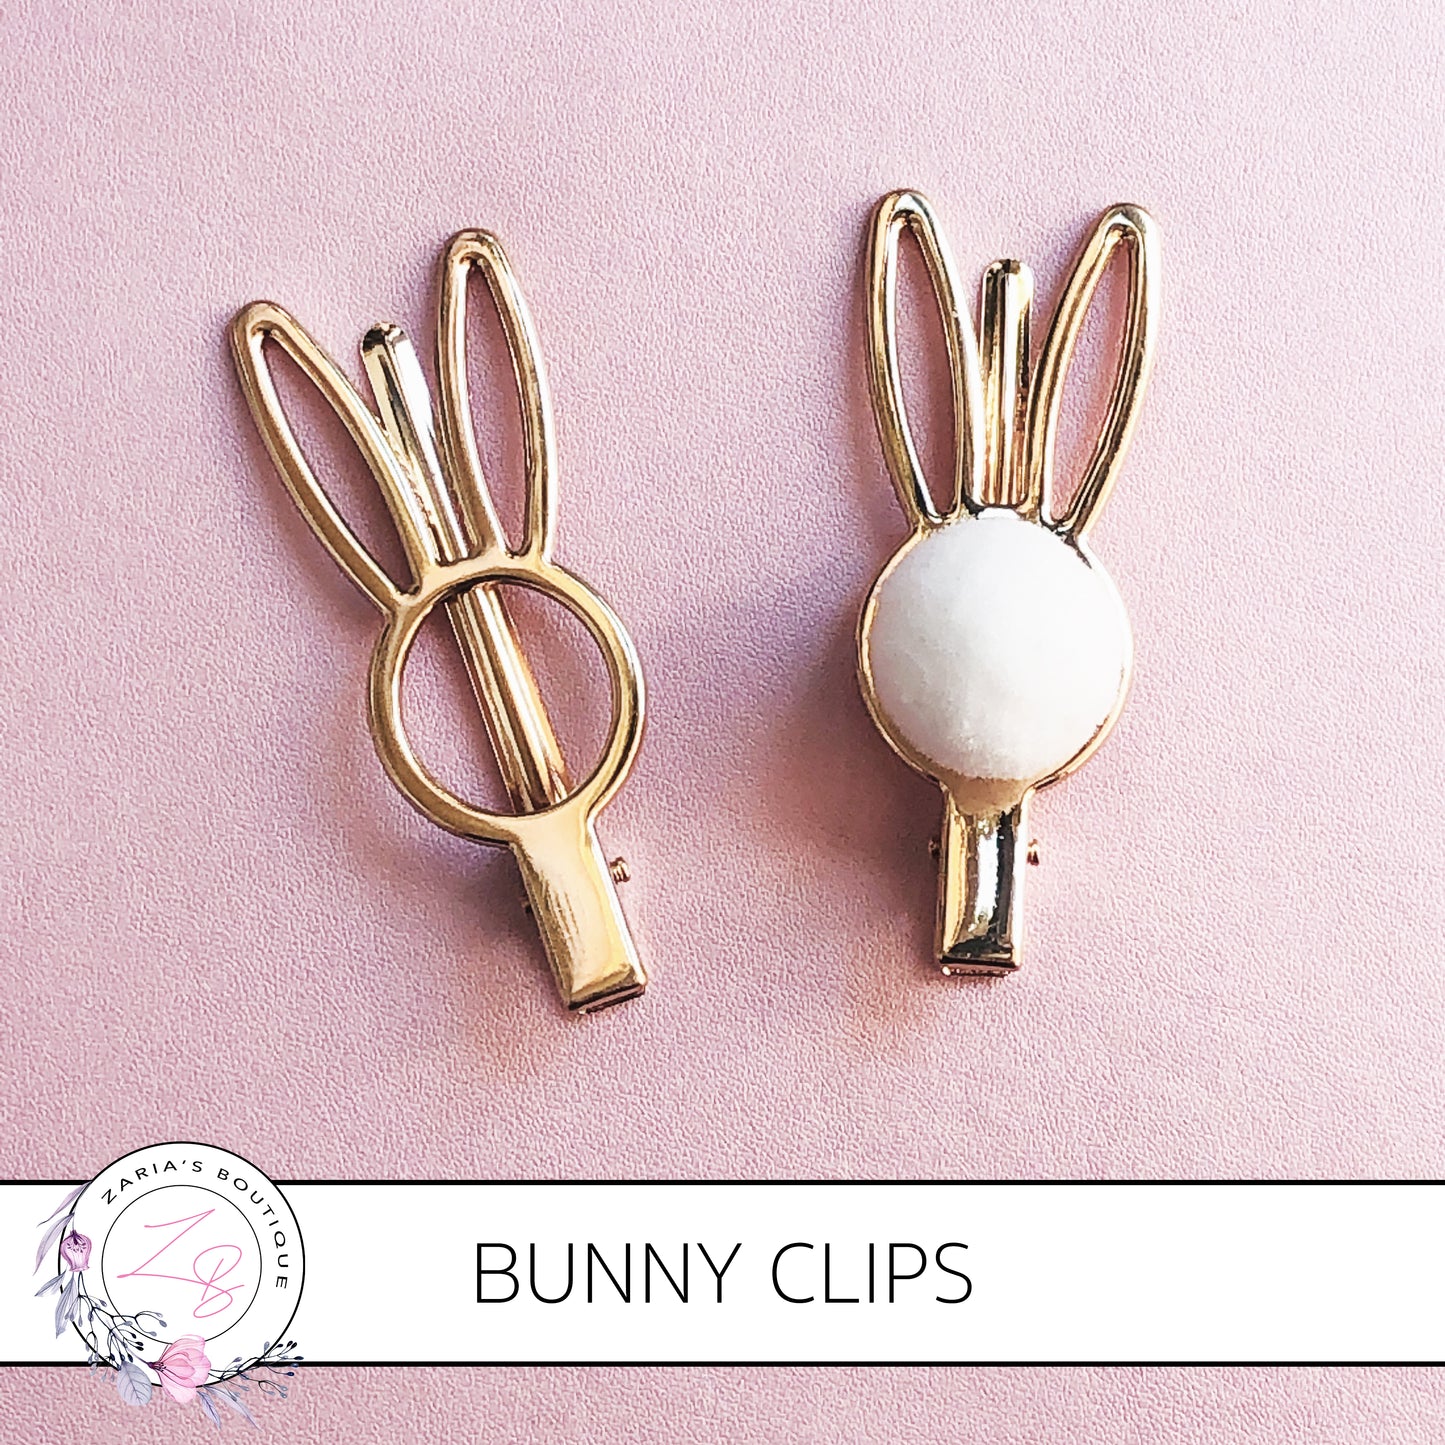 ⋅ Bunny Clips ⋅ Pink or Blue ⋅ Alligator Easter Rabbit Hair Clips ⋅